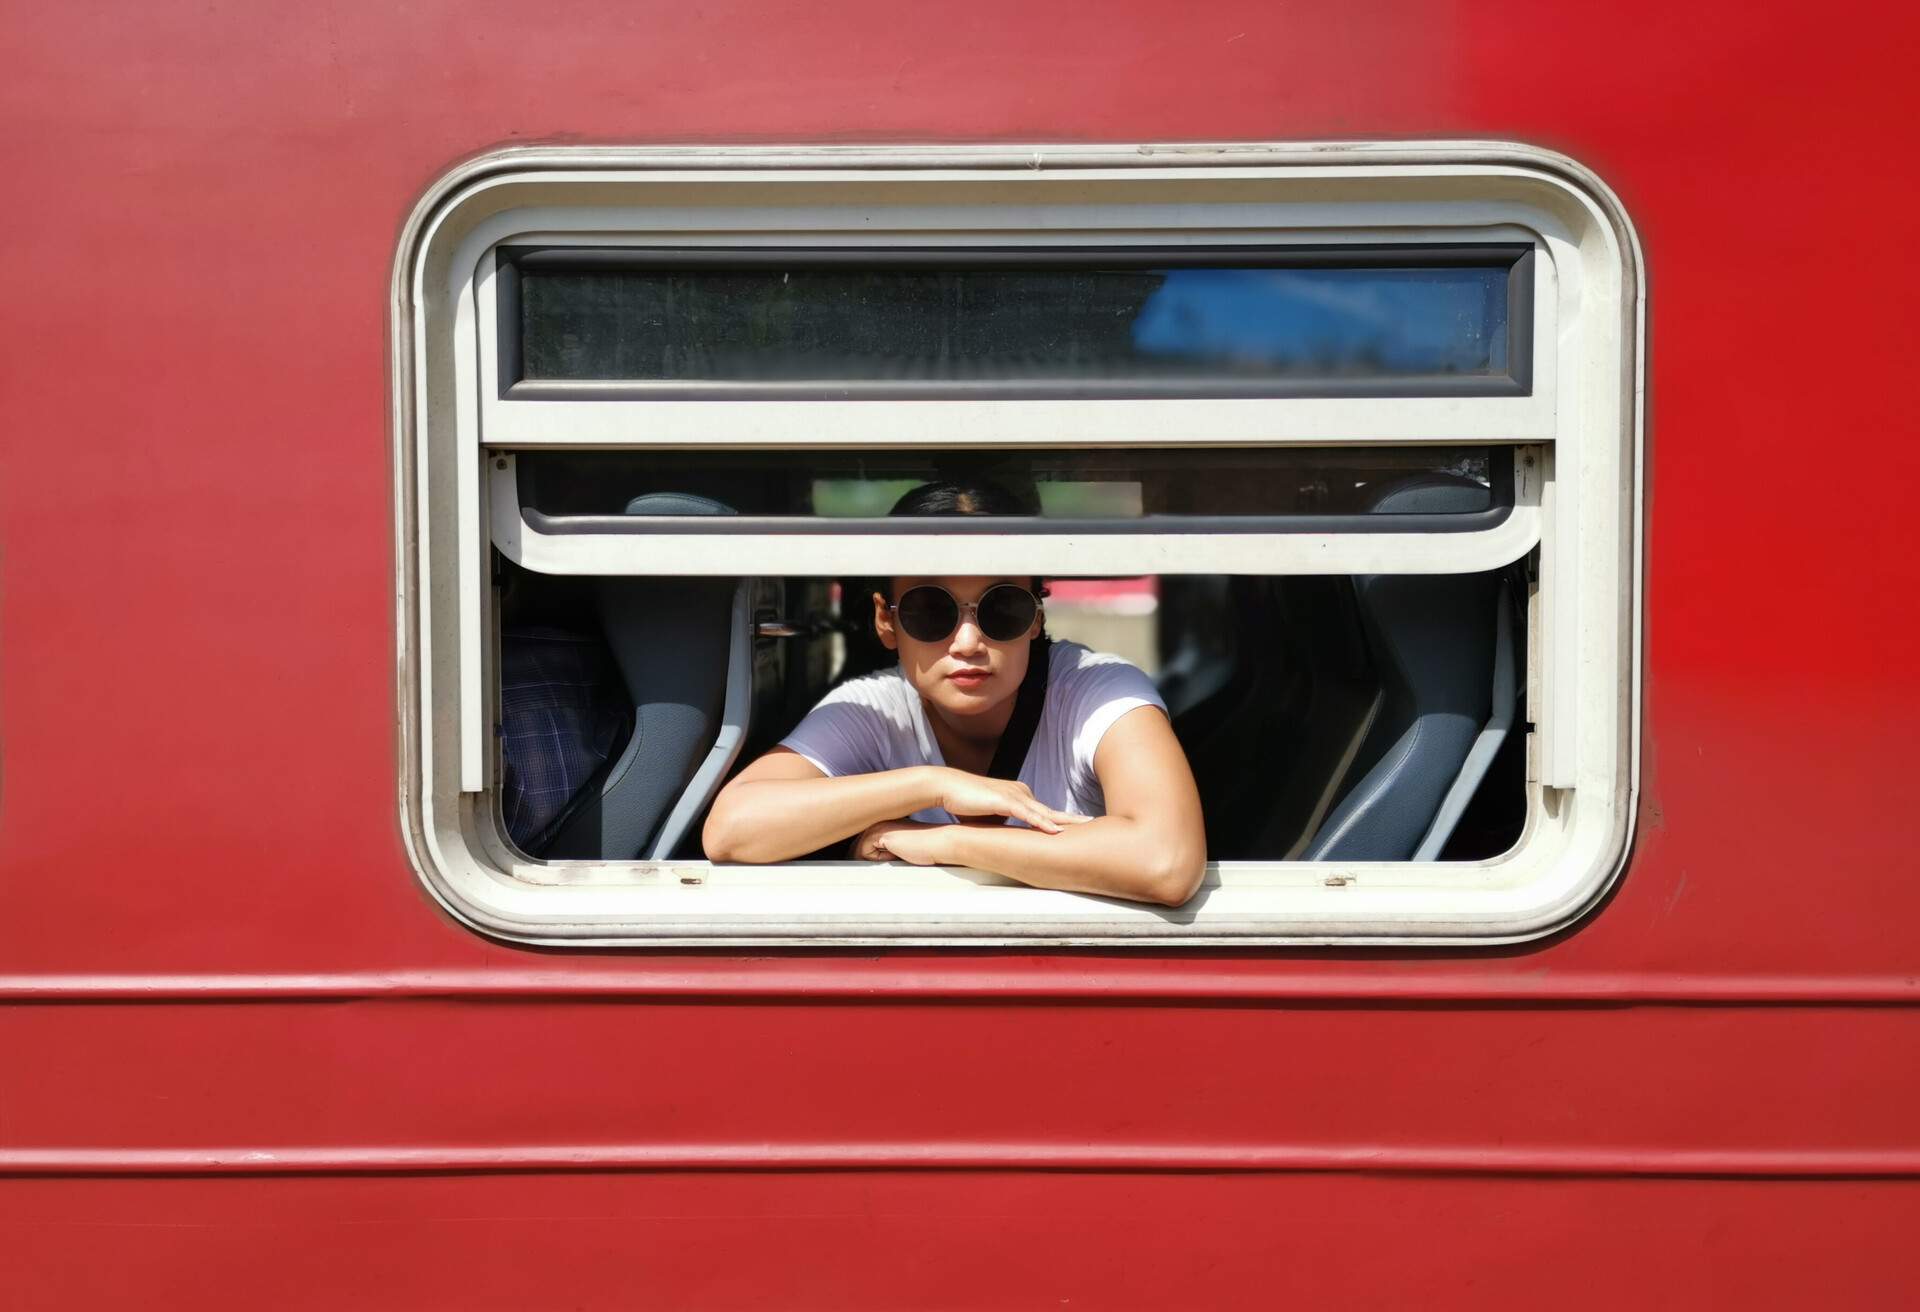 THEME_TRAIN_WOMAN_GettyImages-1197453023-13.jpg